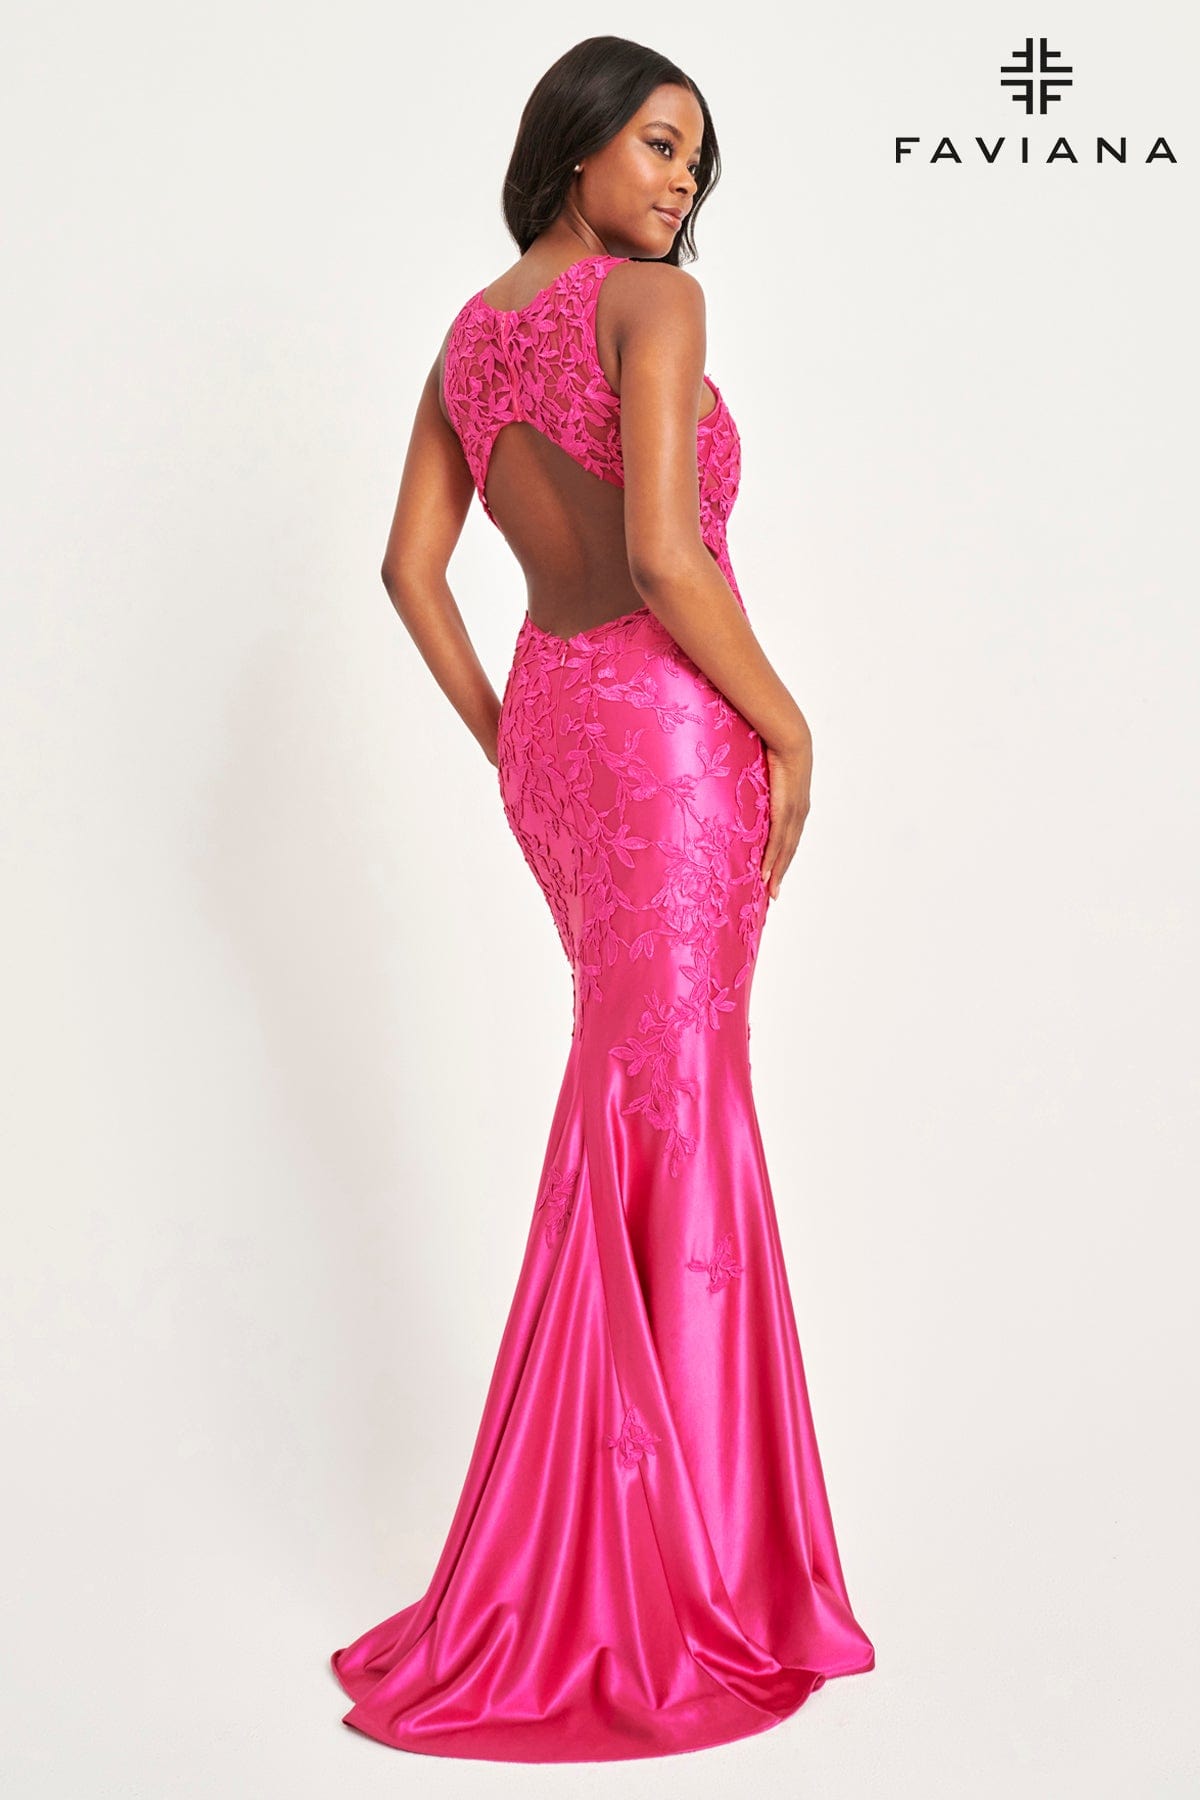 Shiny Satin Dress With Lace Applique And Open Back | 11082